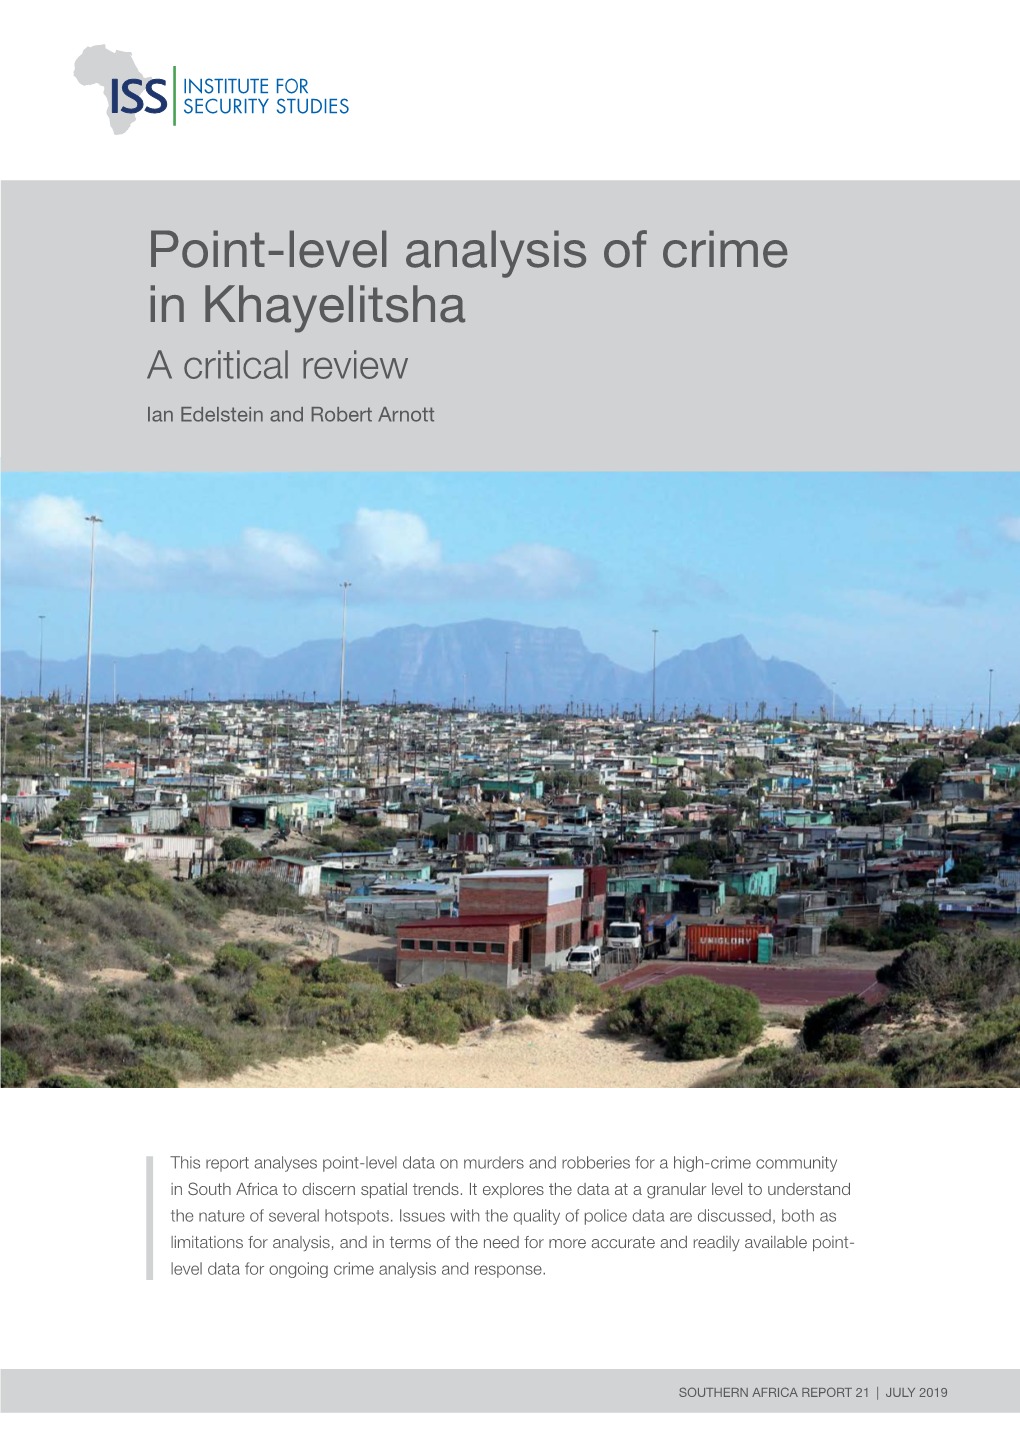 Point-Level Analysis of Crime in Khayelitsha a Critical Review Ian Edelstein and Robert Arnott